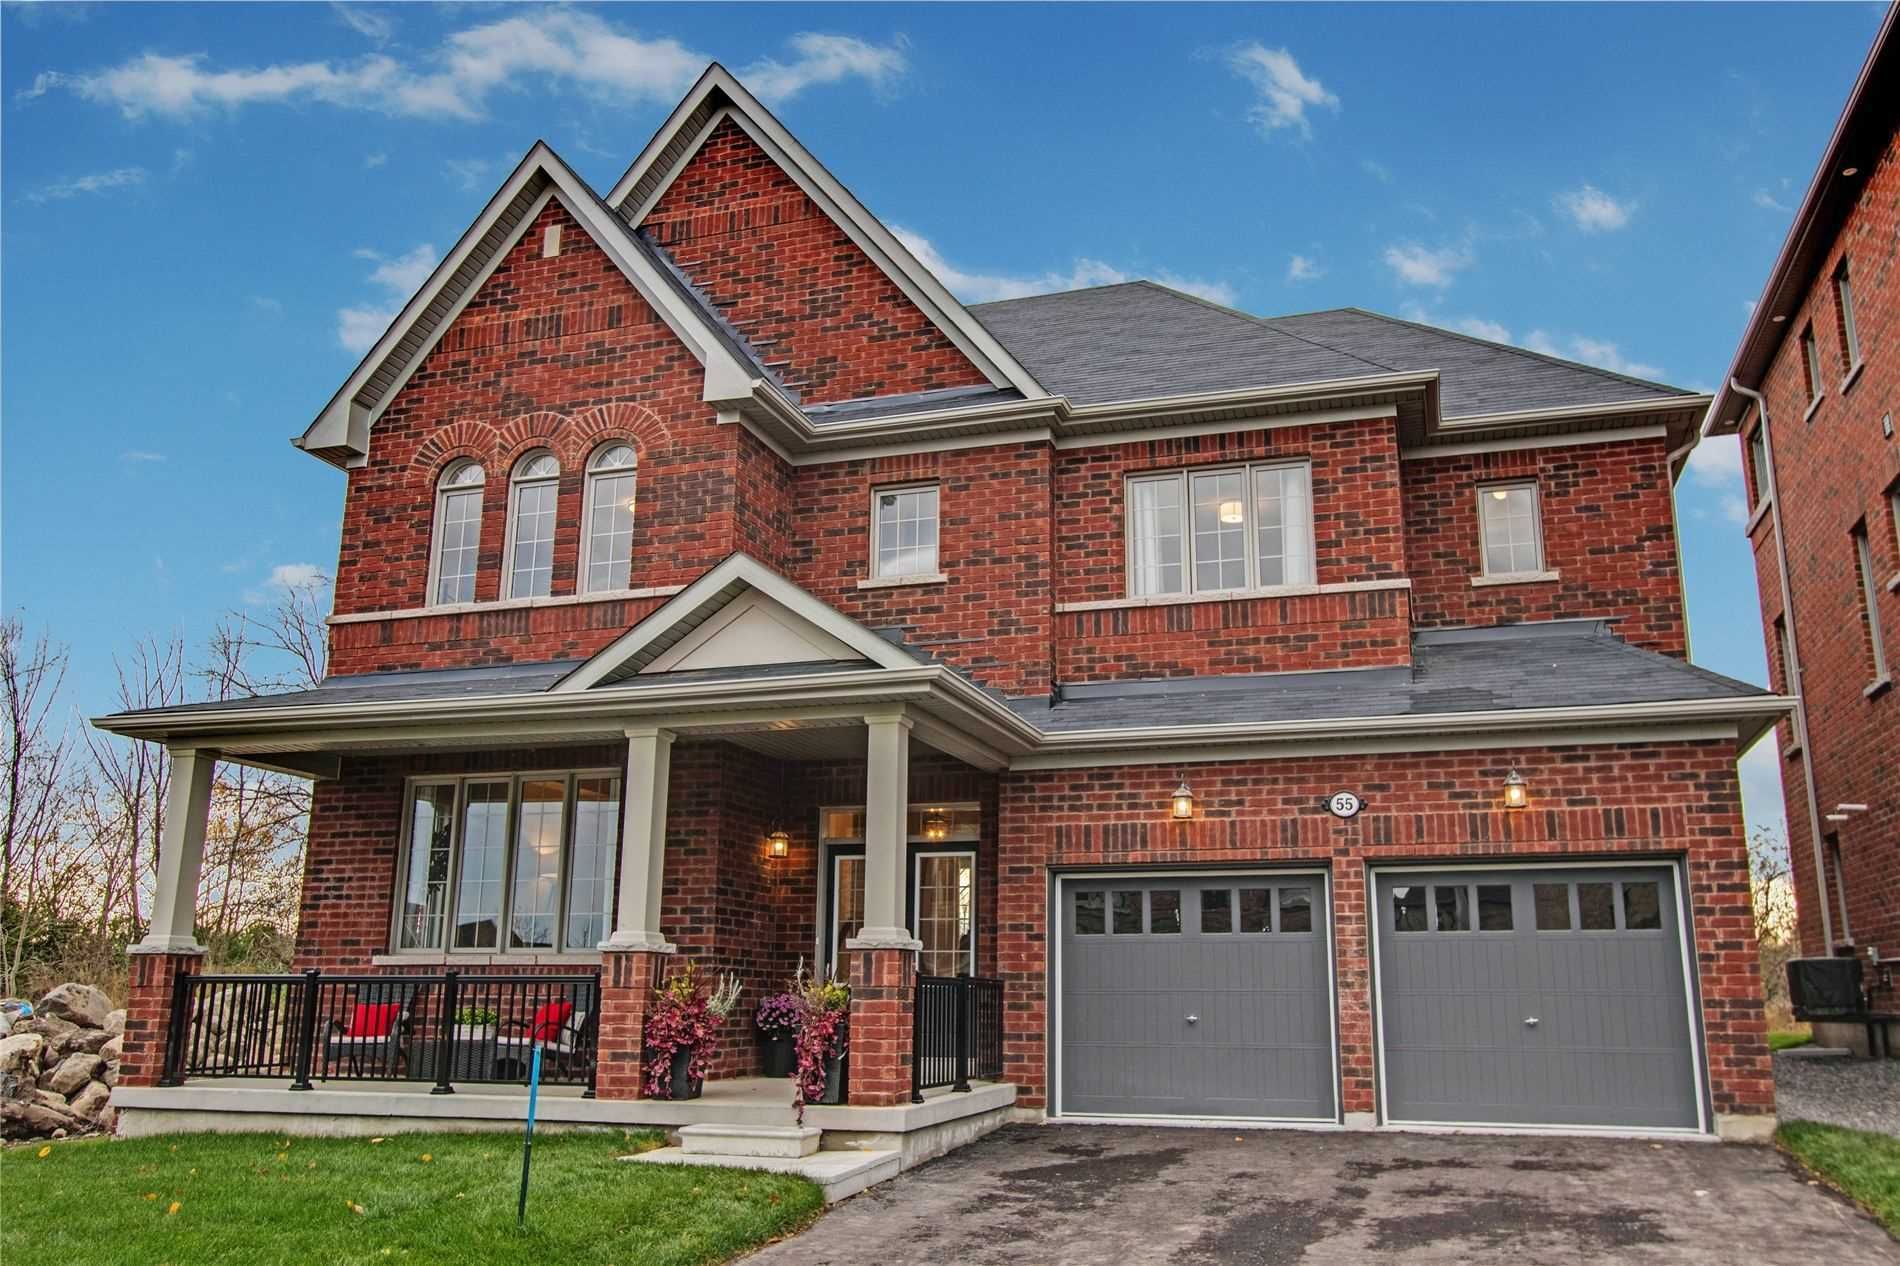 New property listed in Bowmanville, Clarington